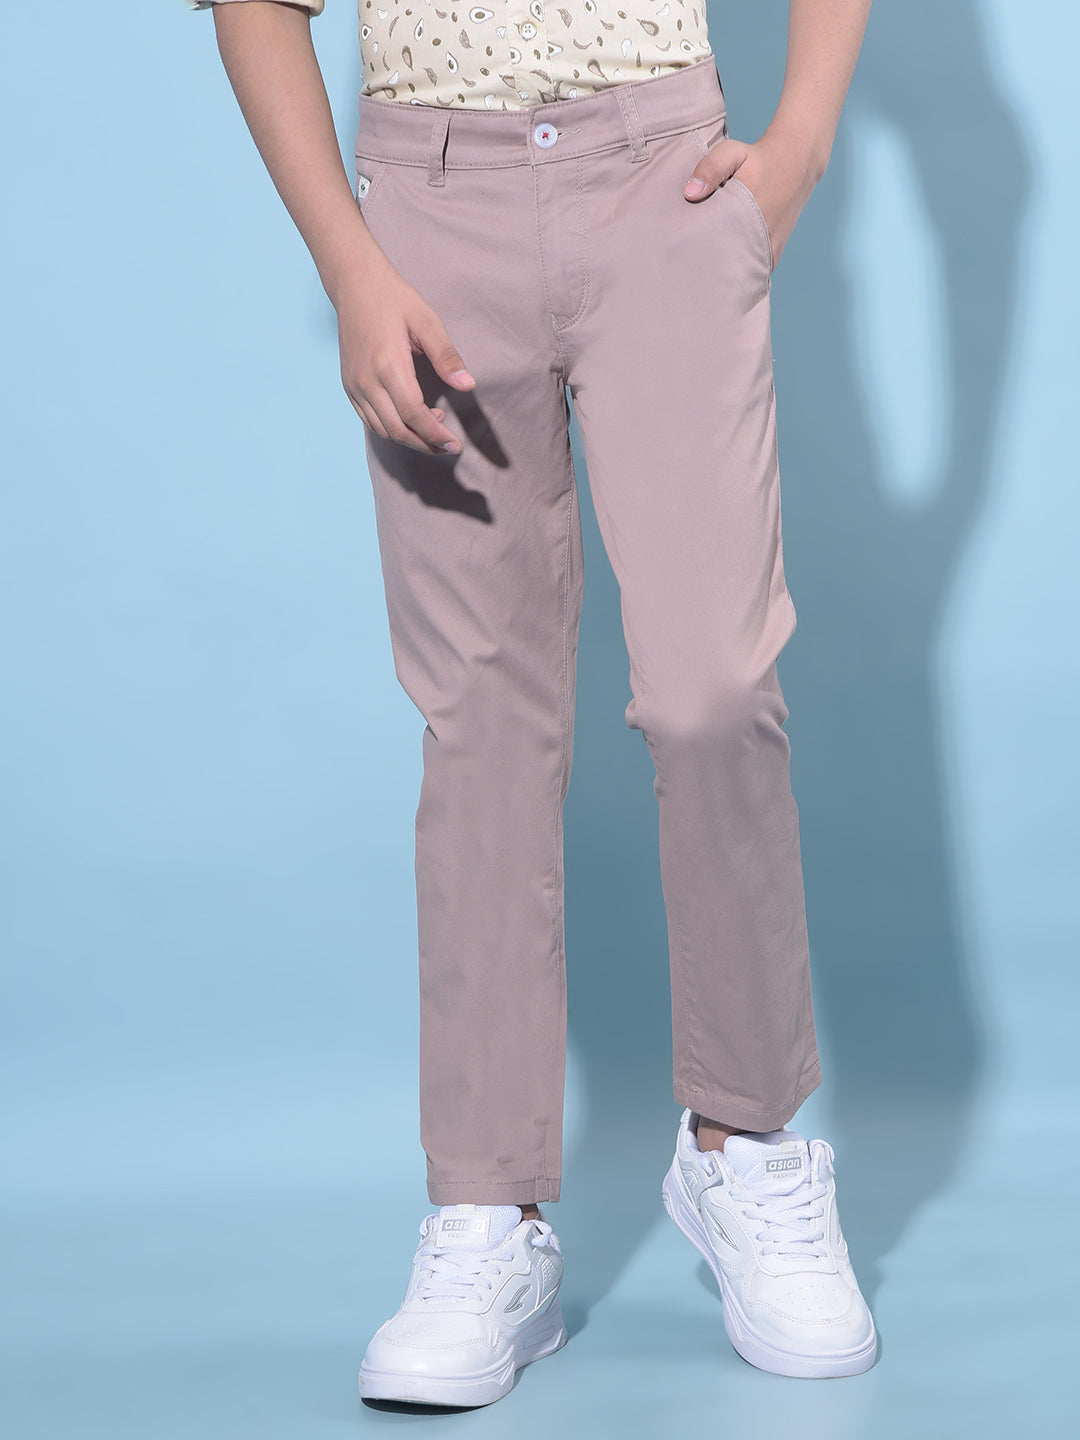 Brown Cotton Chinos Trousers-Boys Trousers-Crimsoune Club